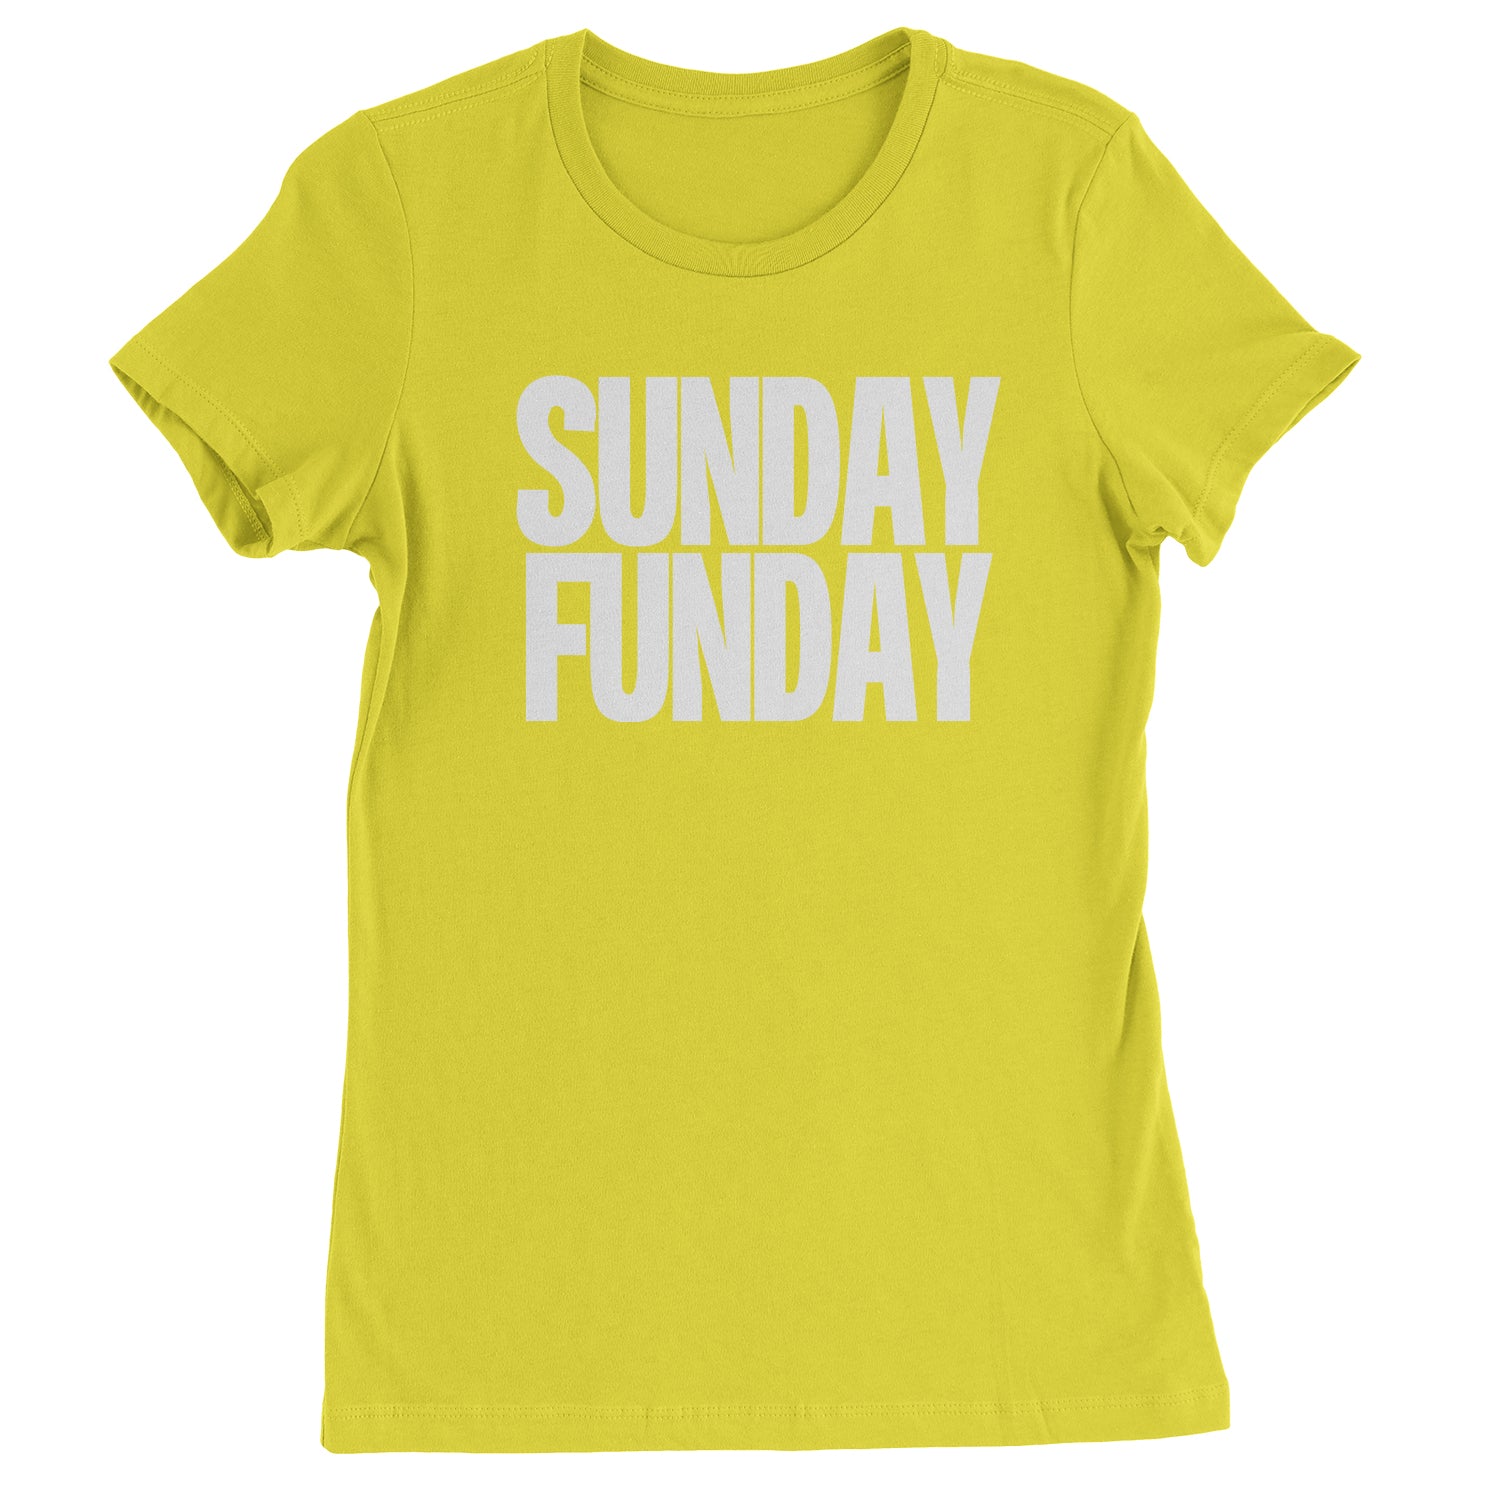 Sunday Funday Womens T-shirt day, drinking, fun, funday, partying, sun, Sunday by Expression Tees